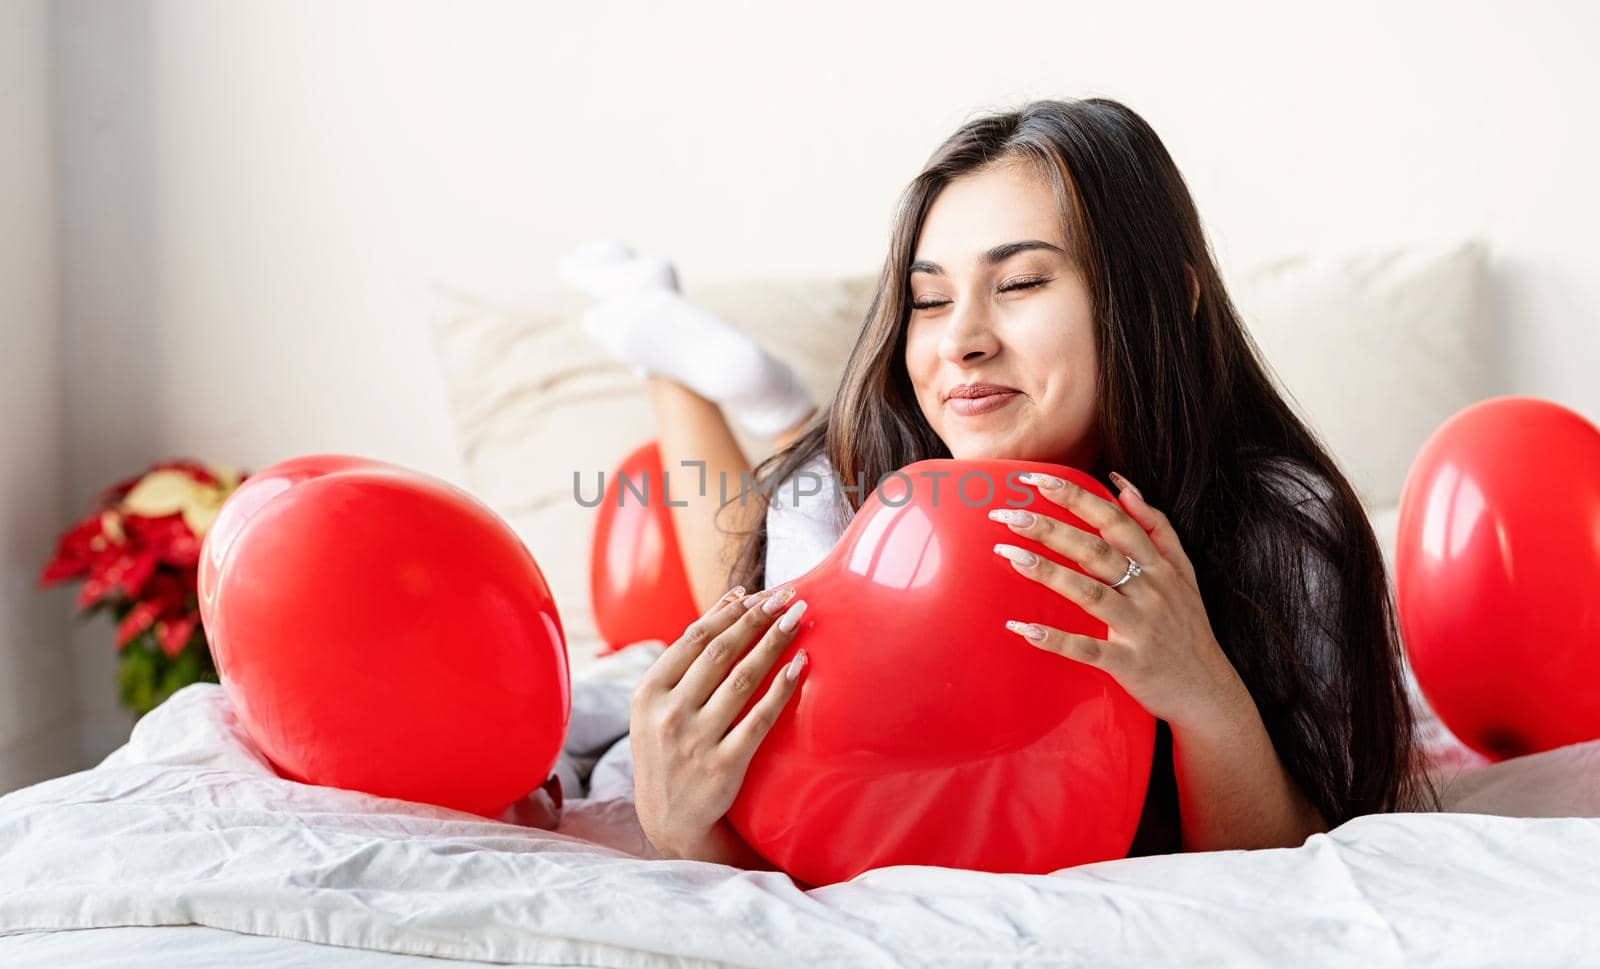 Young happy brunette woman laying in the bed with red heart shaped balloons by Desperada